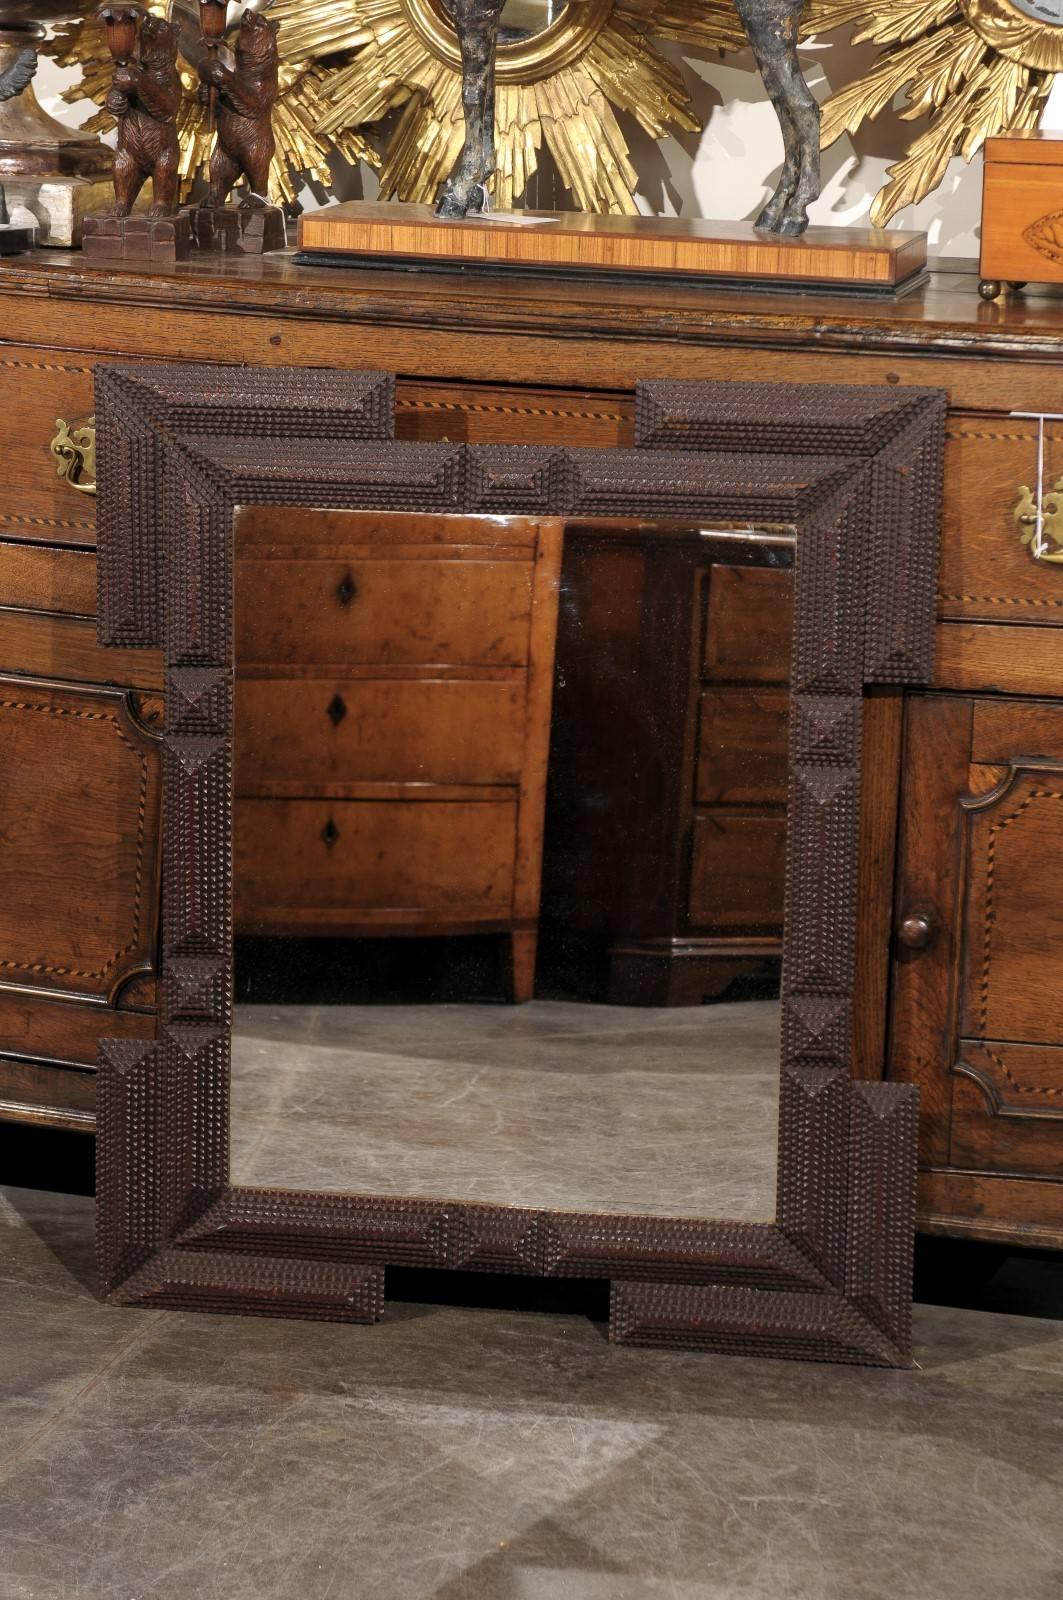 A French Tramp Art carved wood mirror from the turn of the century (late 19th-early 20th century). This French Tramp Art mirror from circa 1900 features a central rectangle, doubled in each of its corners by a motif mimicking the frame. The ensemble